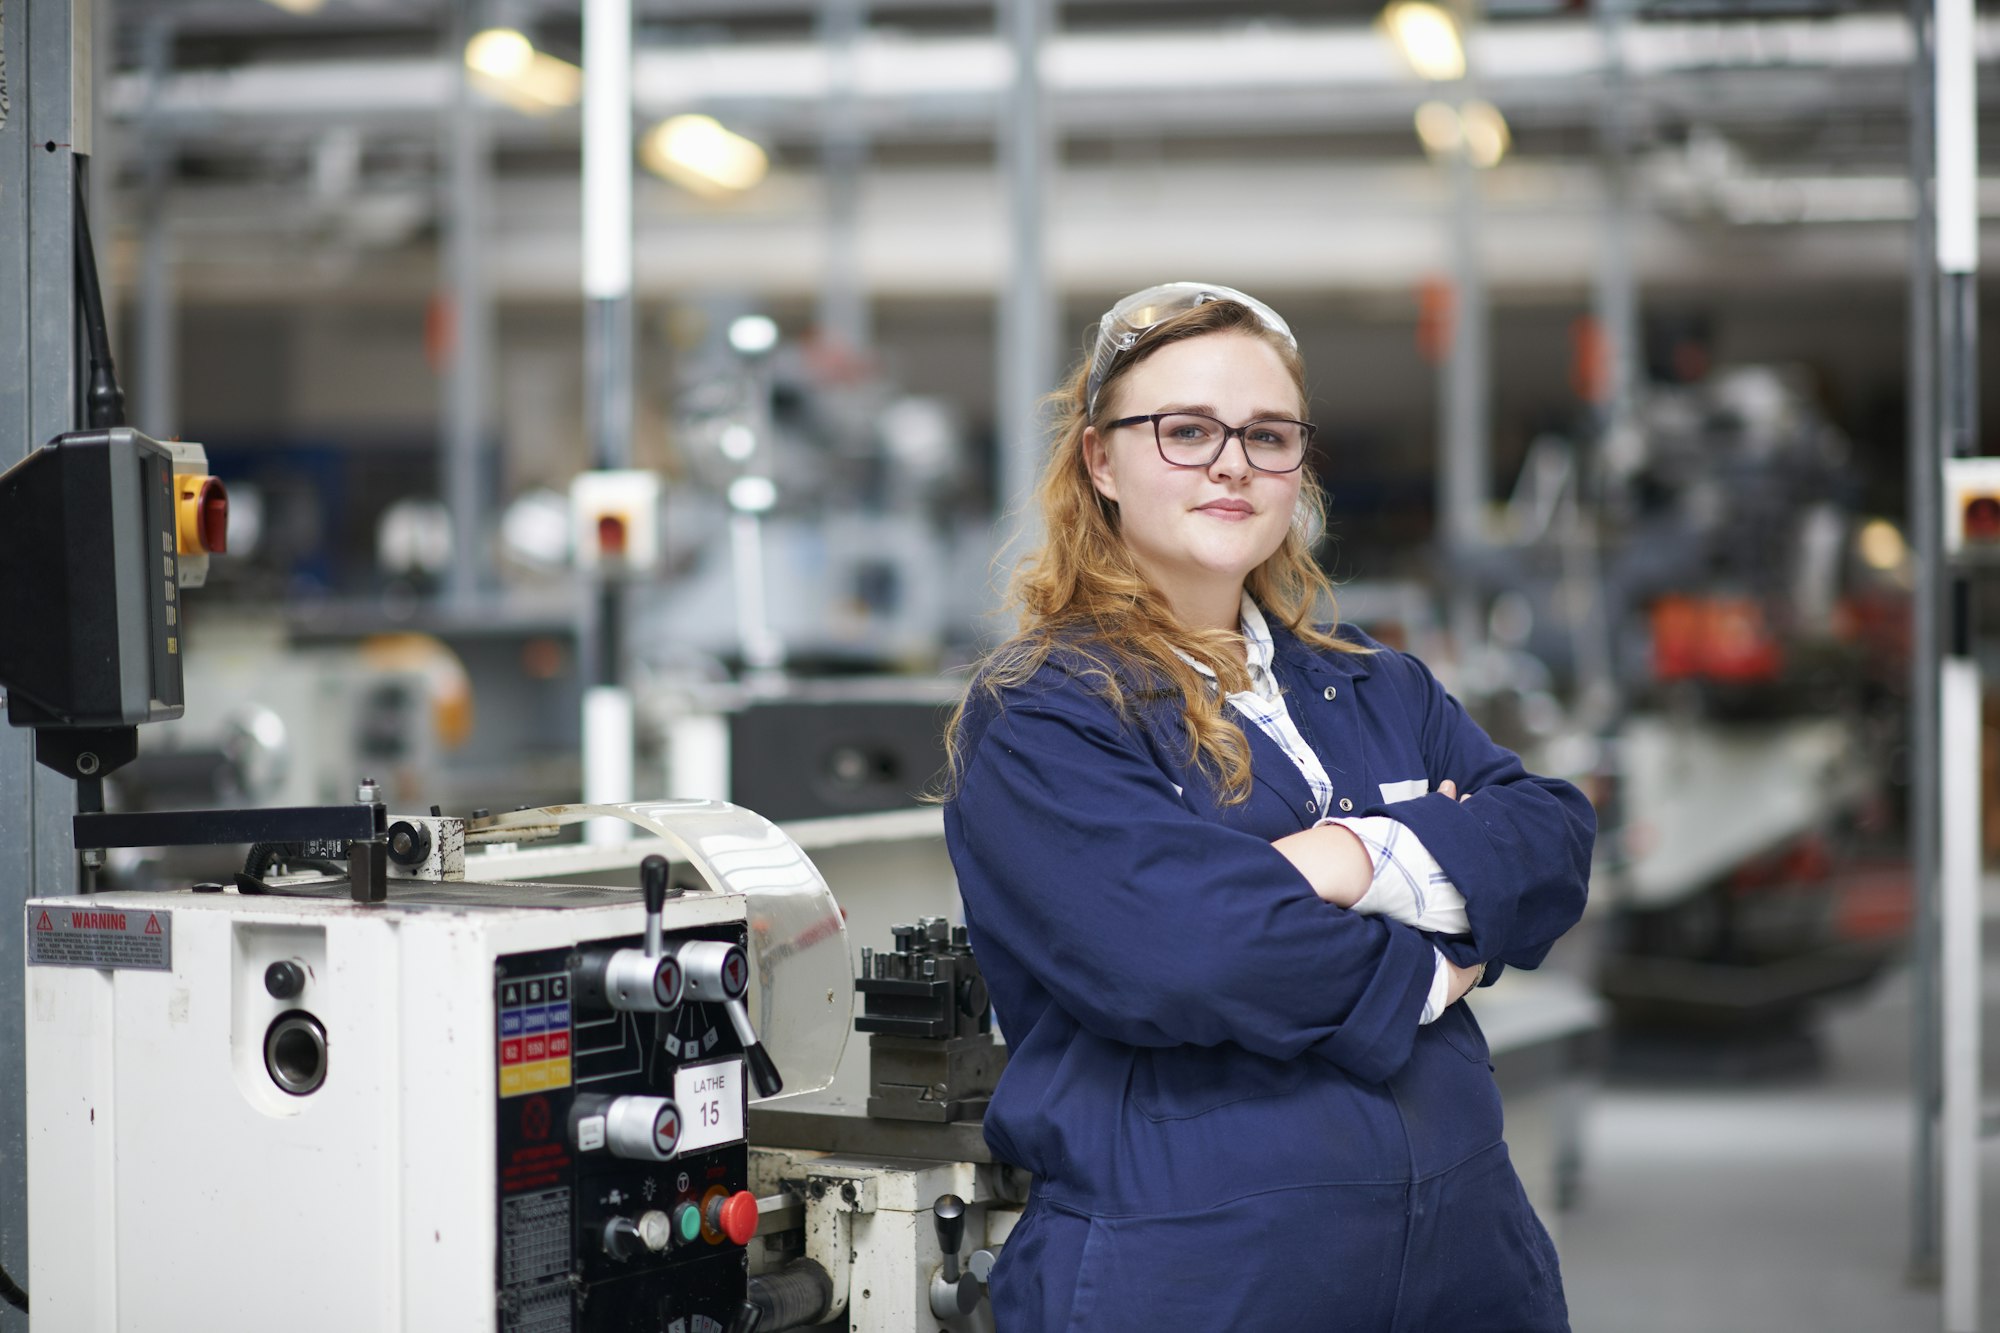 Portrait of female higher education student in machine workshop at college